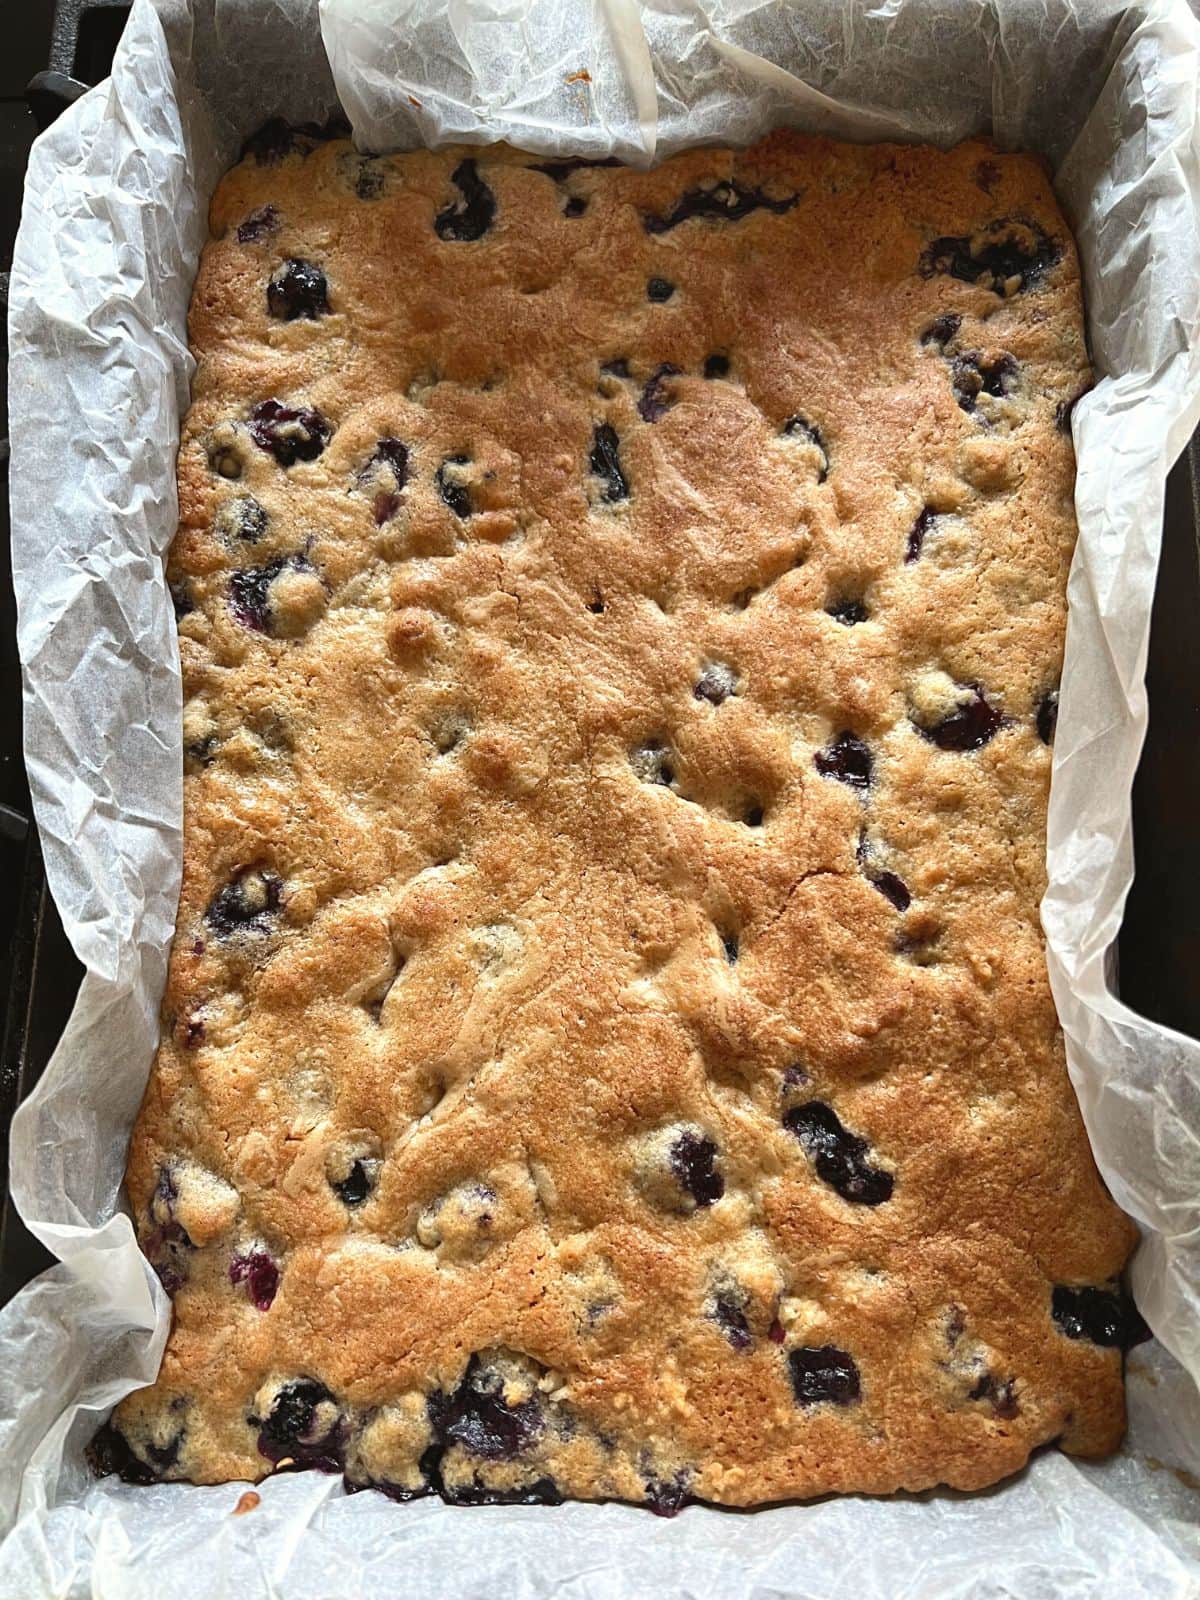 Baked blueberry blondies cooling before cutting.